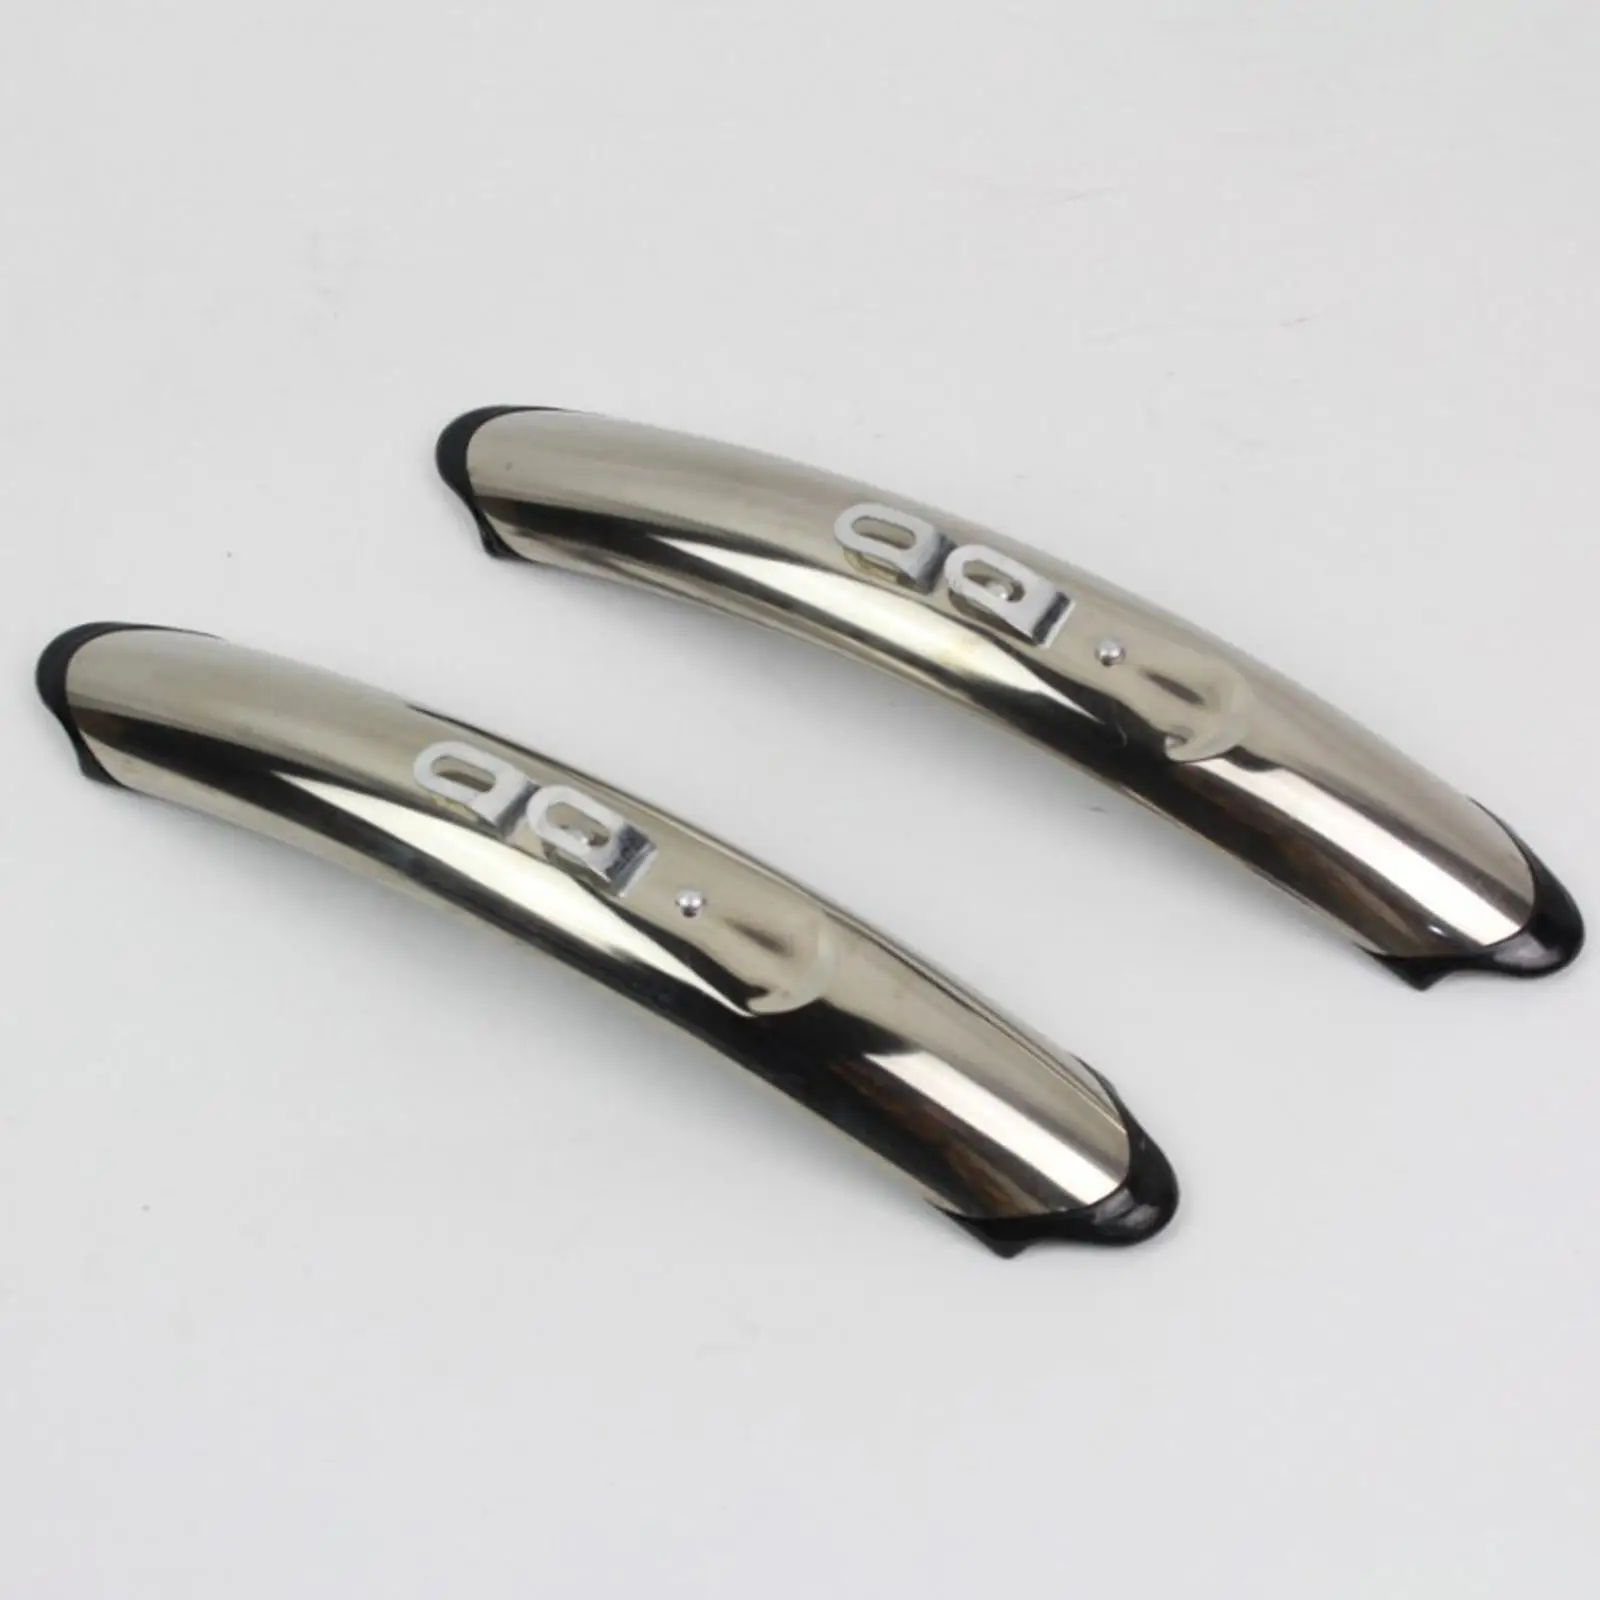 1 Pair Front Rear Mudguards 27in Vintage Adjustable Stainless Steel for Road Bike